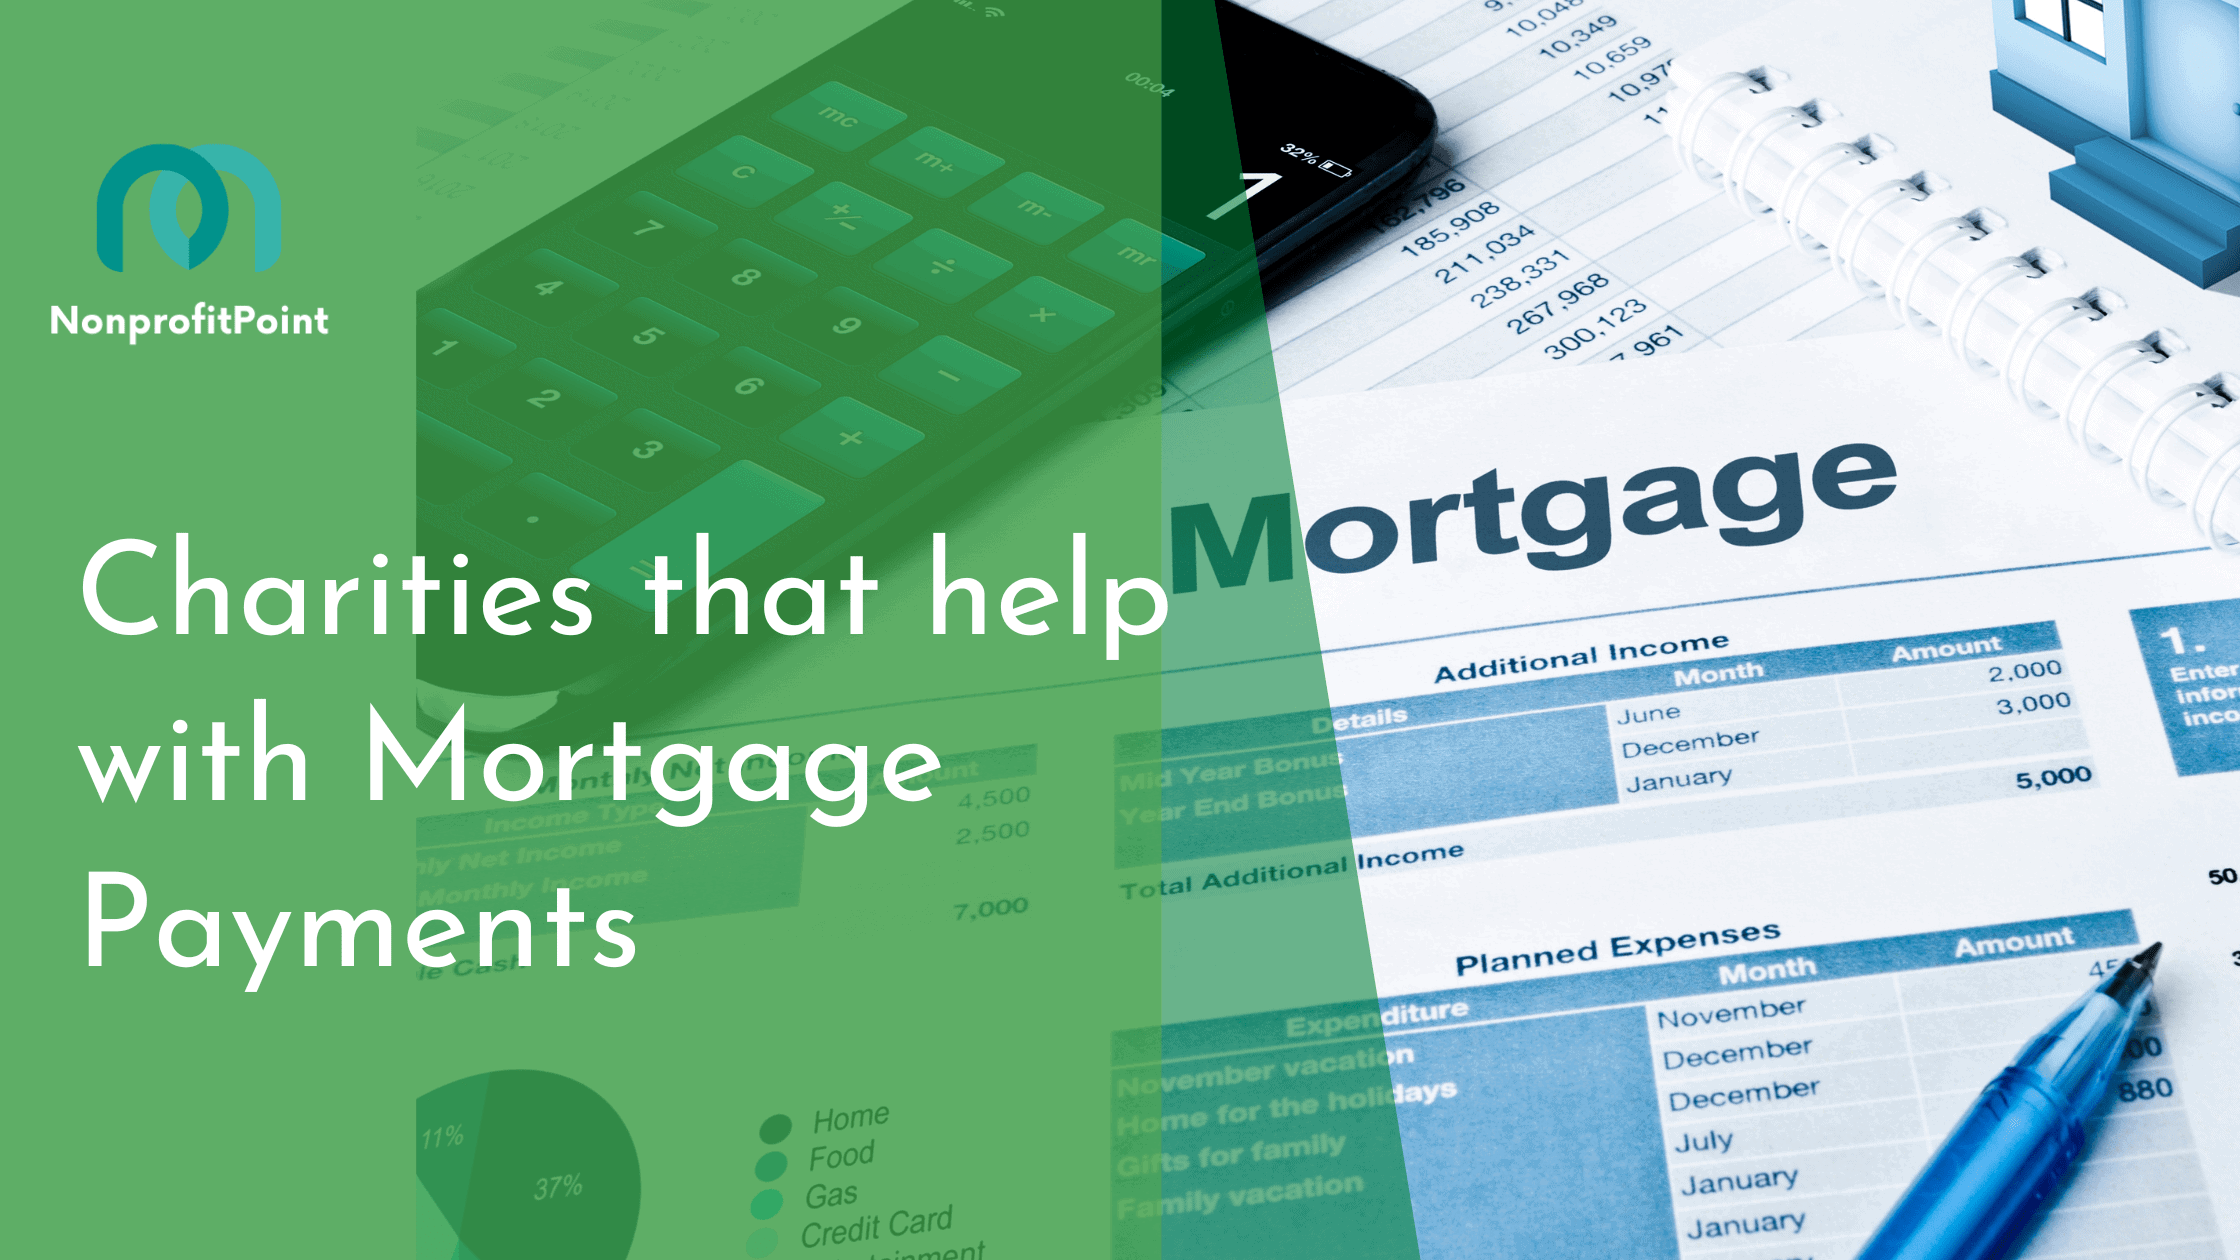 Charities that help with Mortgage Payments.